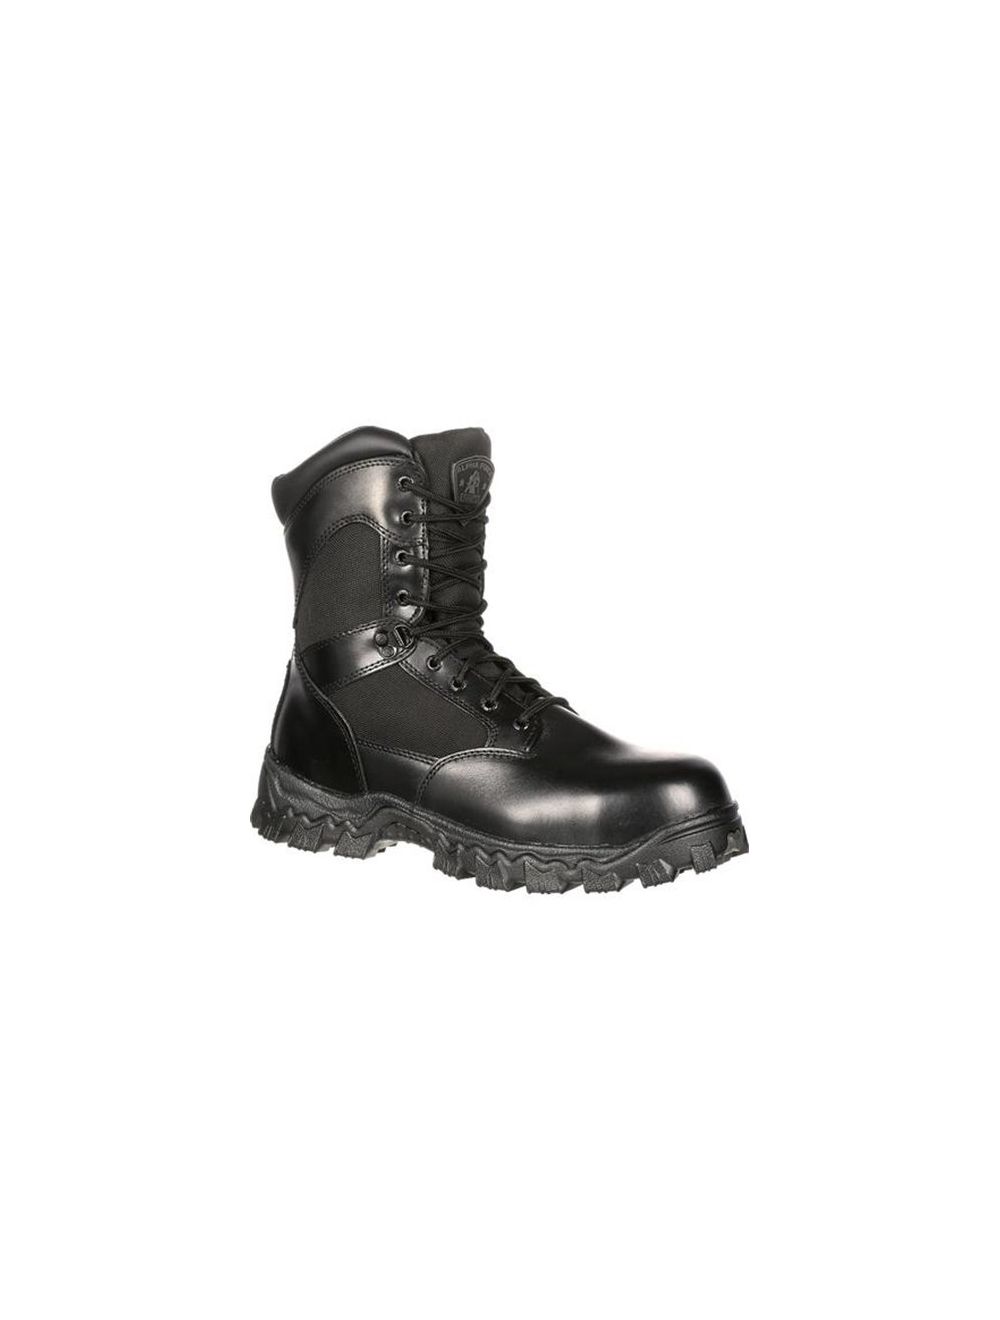 Alpha Force Waterproof 400G Insulated Public Service Boot